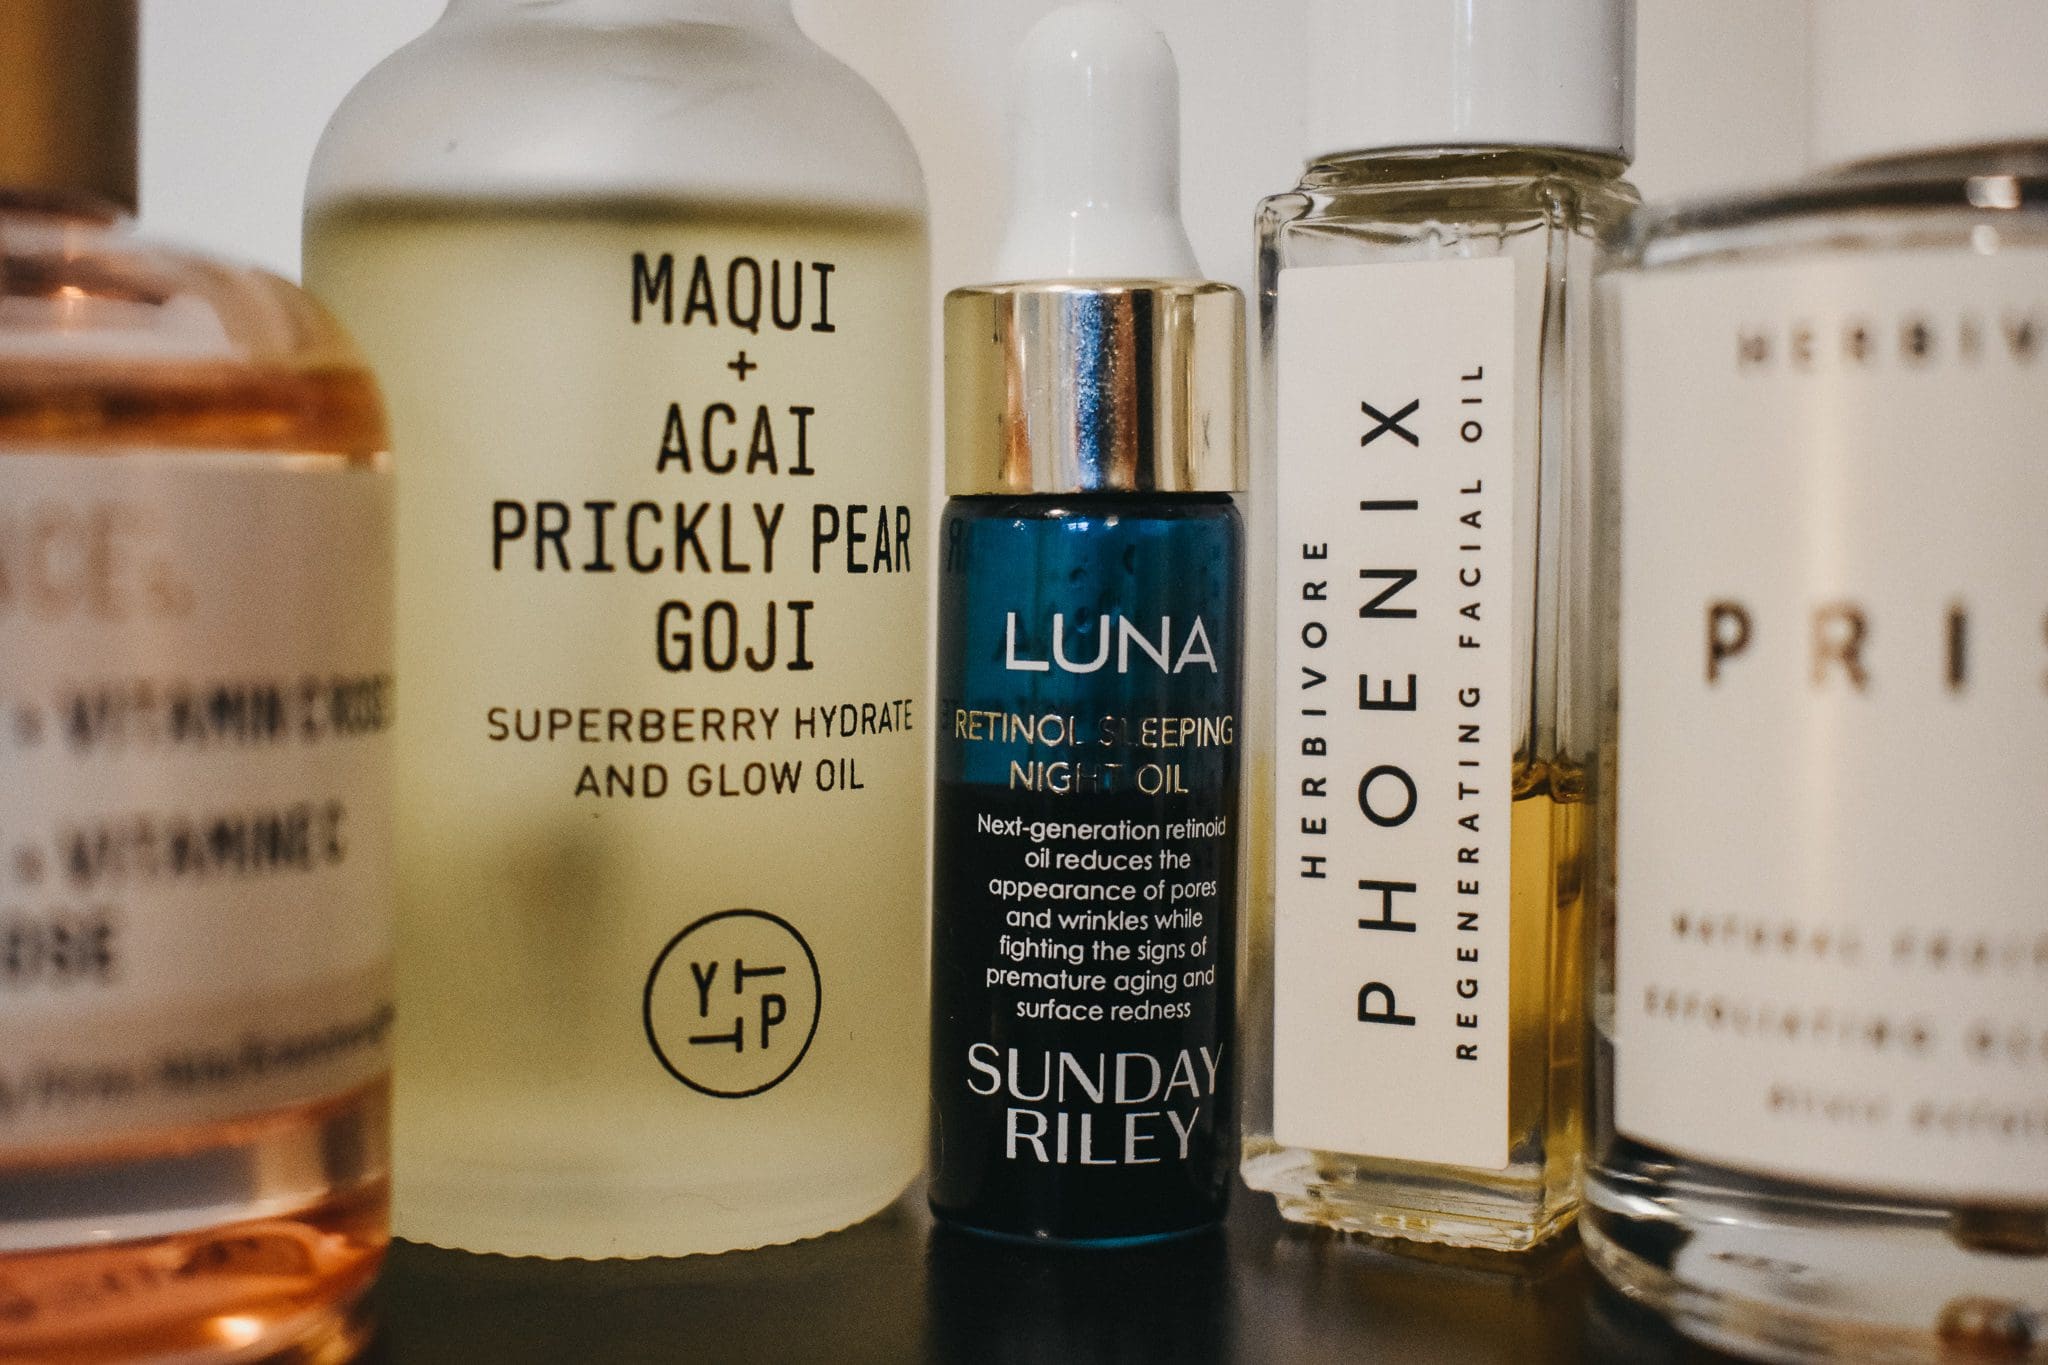 Facial Oils -- featuring Youth to the People Maqui + Acai Prickly Pear Goji Superberry Hydrate and Glow Oil, Sunday Riley's Luna retinol night oil, Biossance's Squalane + Vitamin C rose oil, and Herbivore products (Pheonix regenerating facial oil and prism natural fruit acid glow potion)